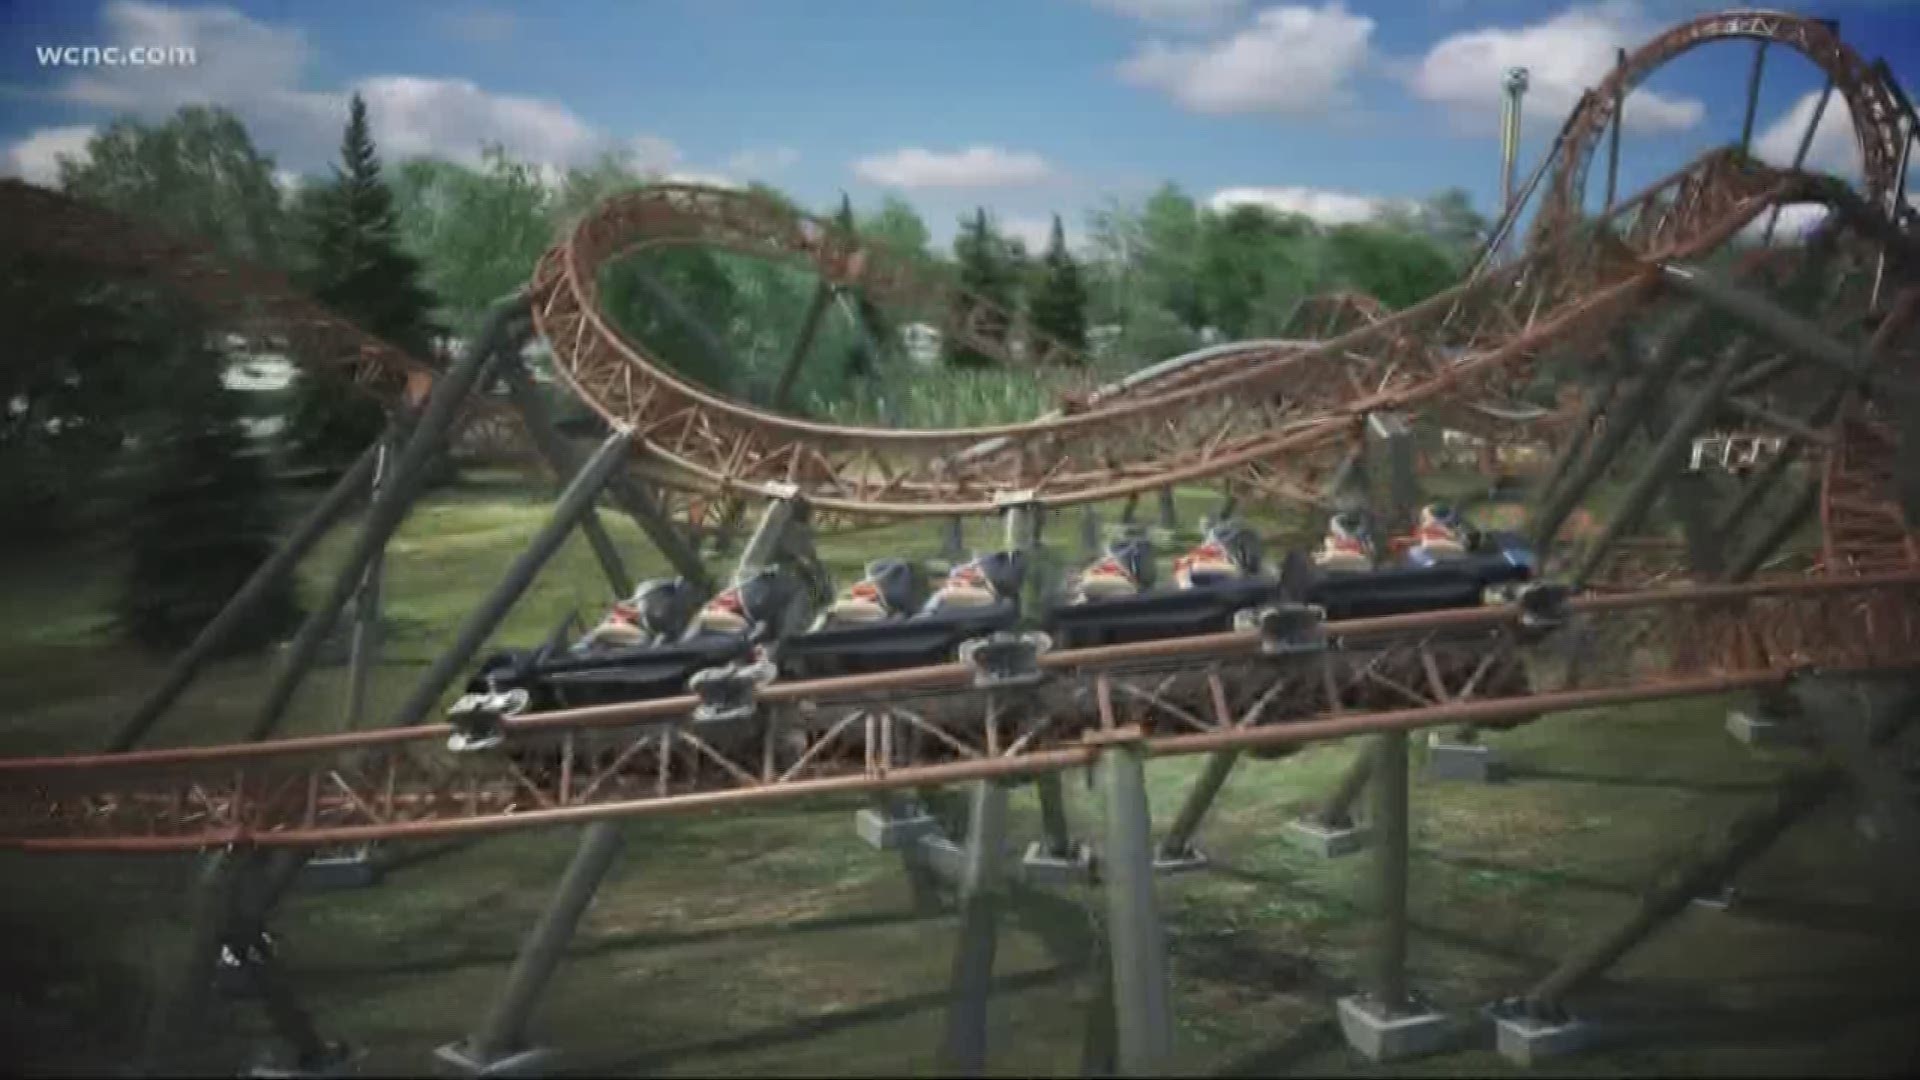 Are you ready for stomach-turning, high speed experiences? Then you should head to Carowinds for the thrills you're looking for, including the all-new coaster, Copperhead Strike.